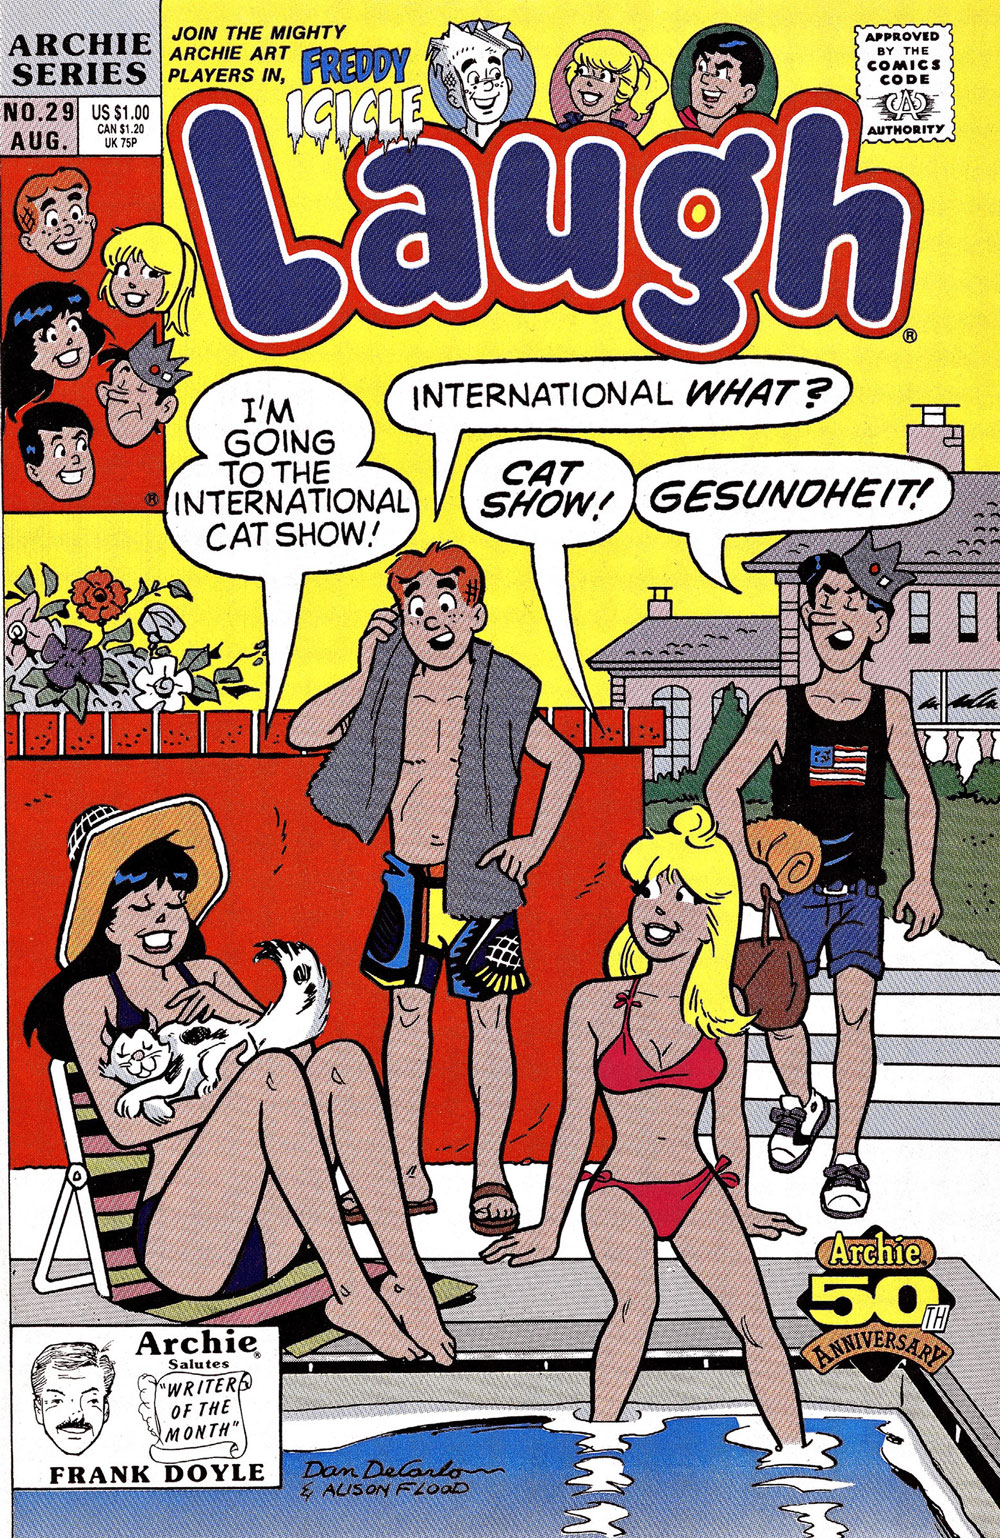 Veronica, Betty, Archie, and Jughead are lounging by Veronica's pool in swimsuits. Veronica is petting a cat and she says she's going to the international cat show. Jughead thinks she has sneezed and says gesundheit.